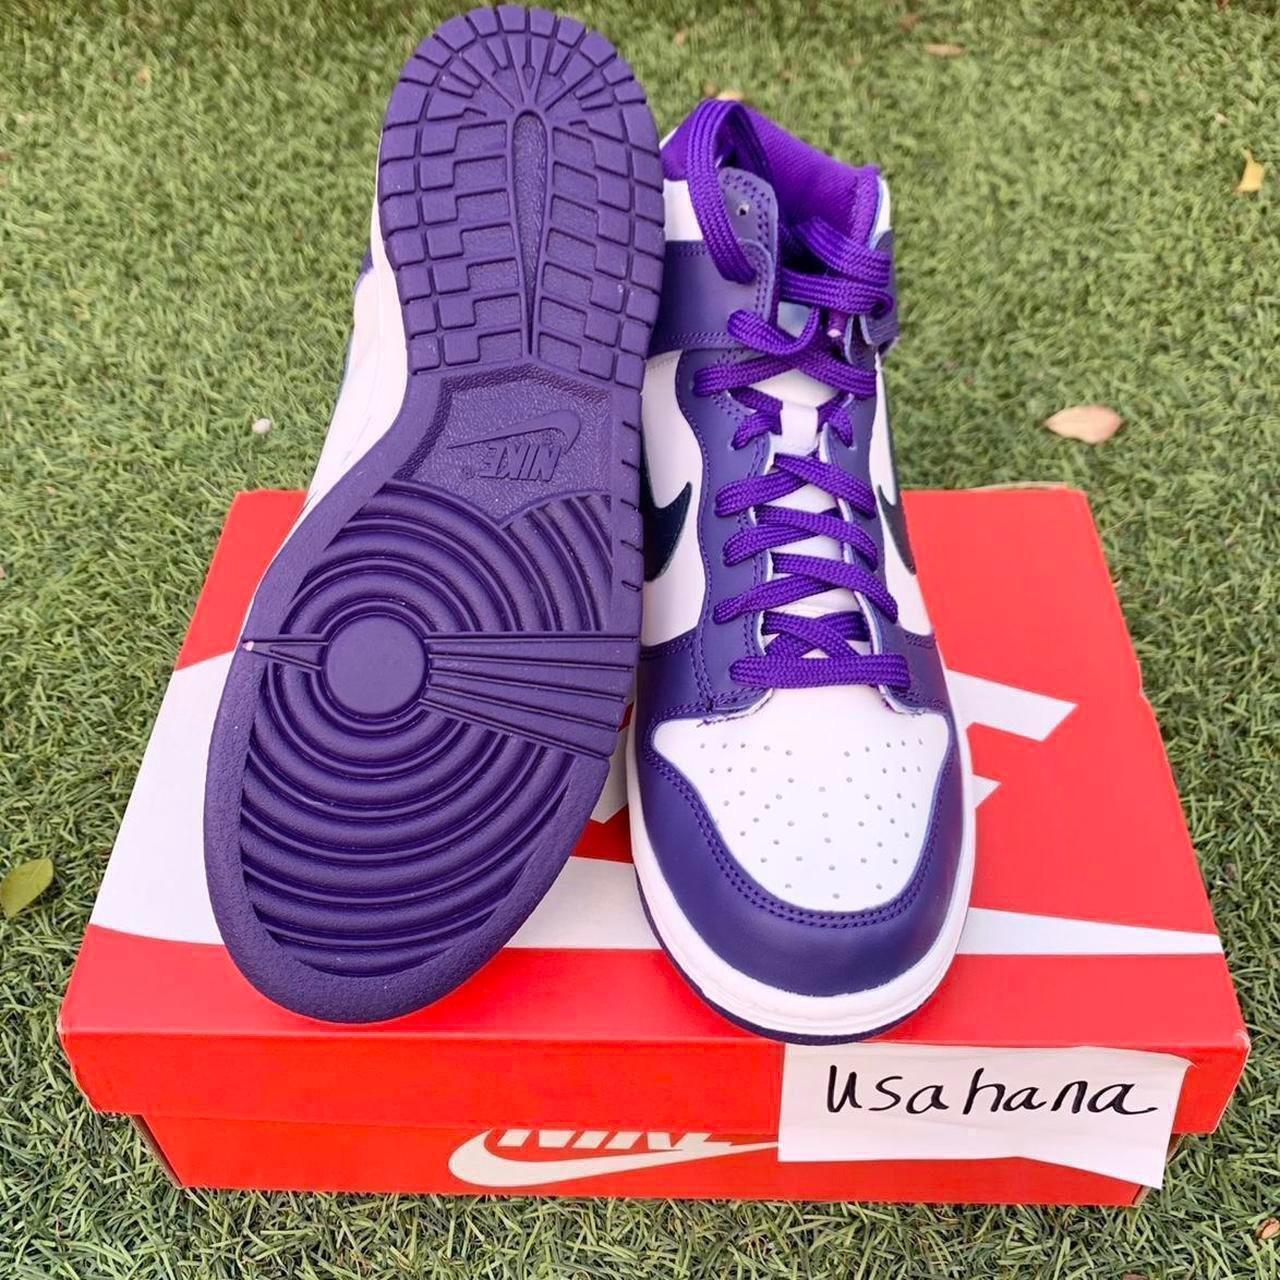 Product Image 3 - Nike dunk high GS purple